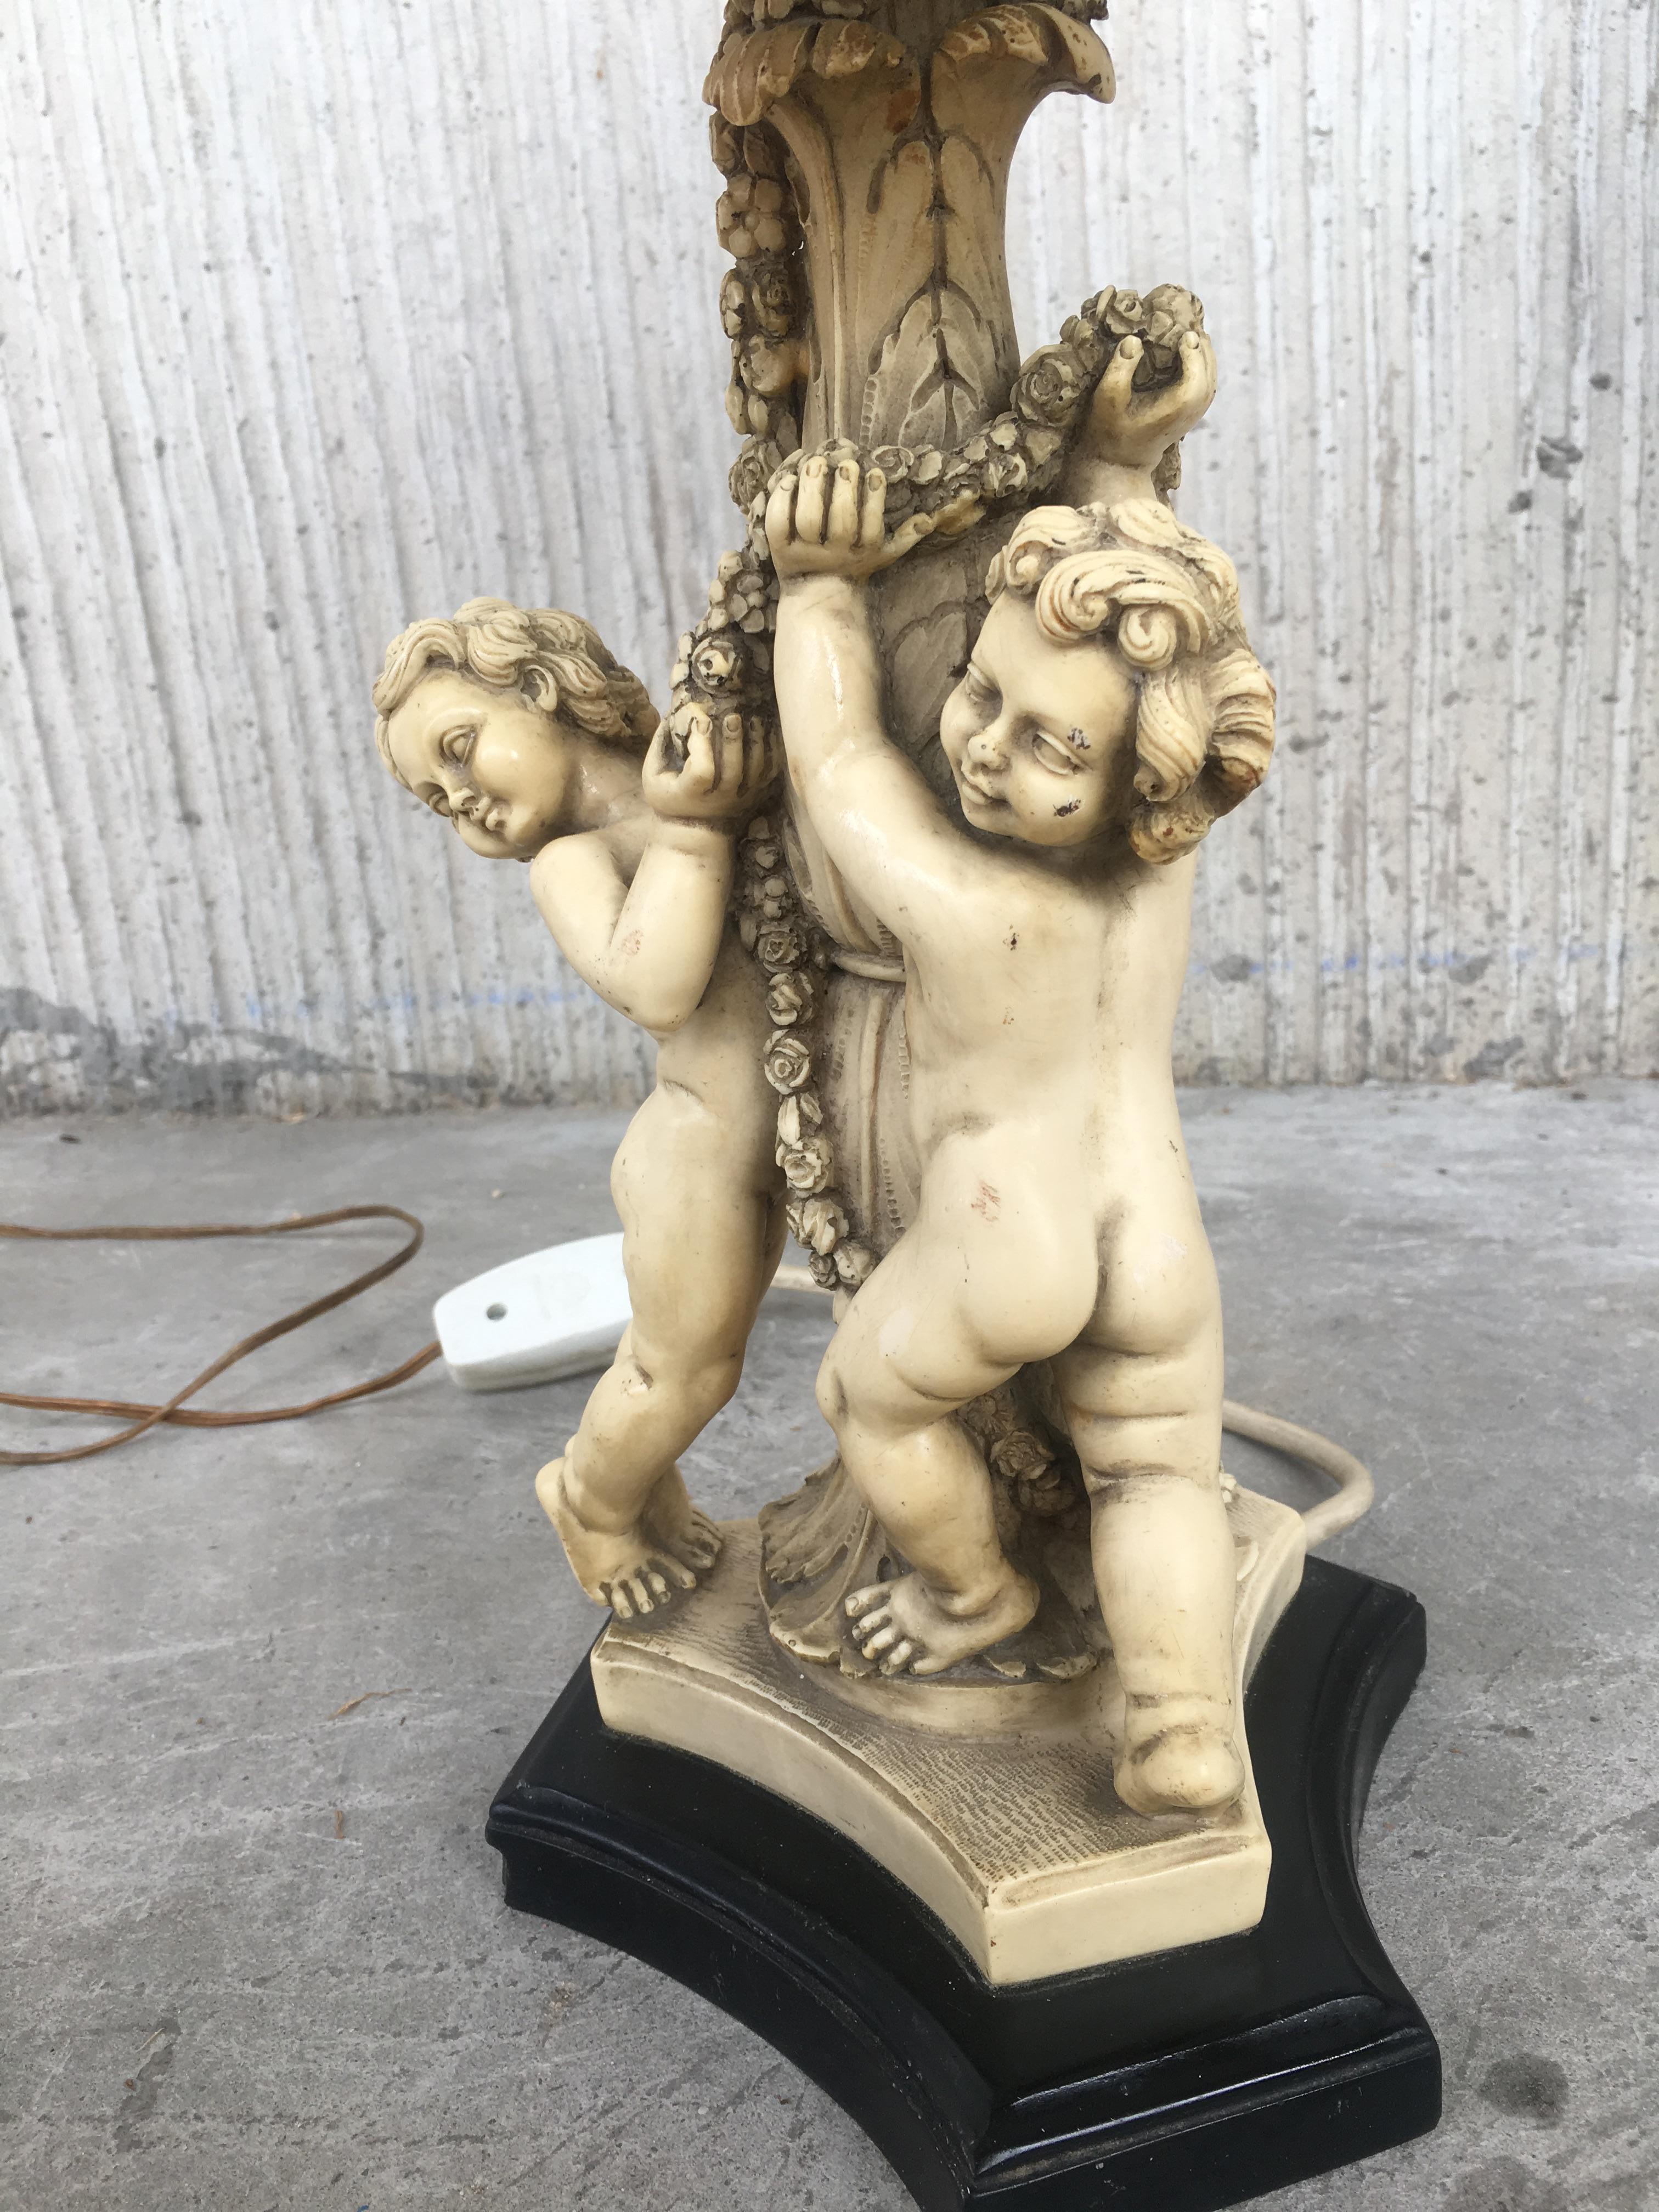 20th Century Pair of White Resin Cherub Lamps on Wooden Bases by G. Ruggeri For Sale 3